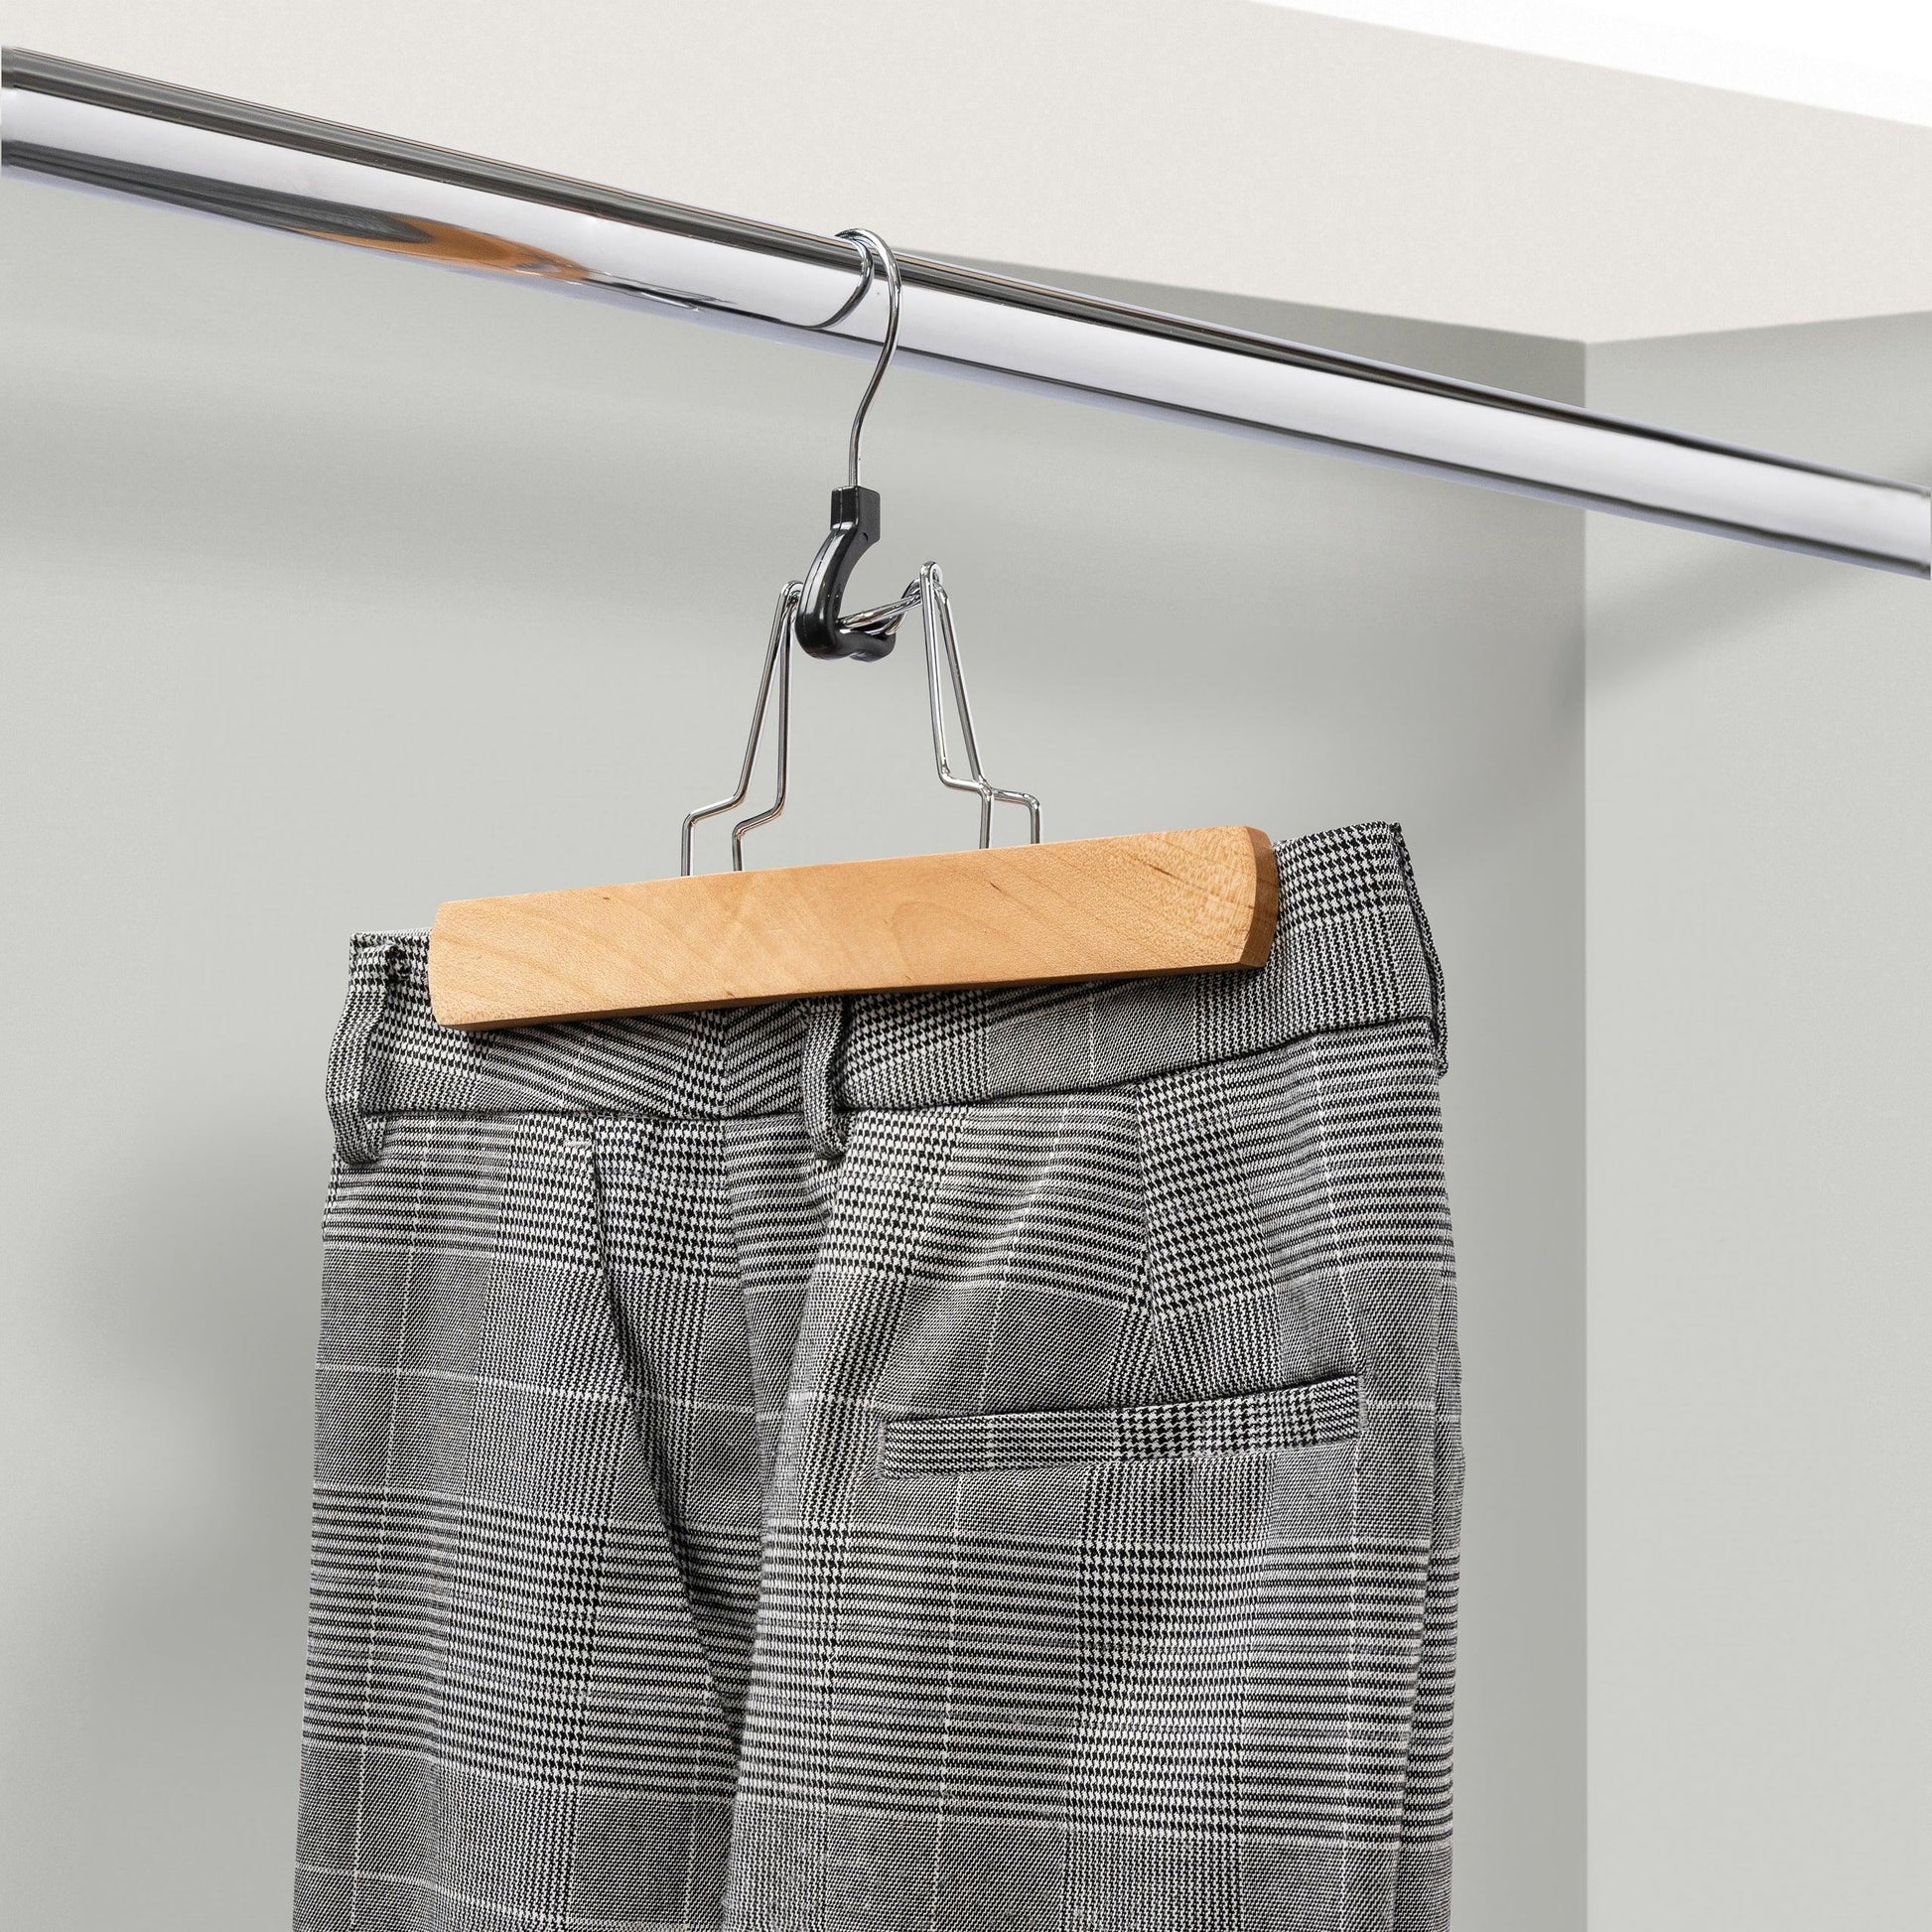 Natural Wooden Pant Hanger w/Snap-Lock & Soft Pads Installed - 23cm X 15mm Thick (Sold in 25/50/100) - Hangersforless